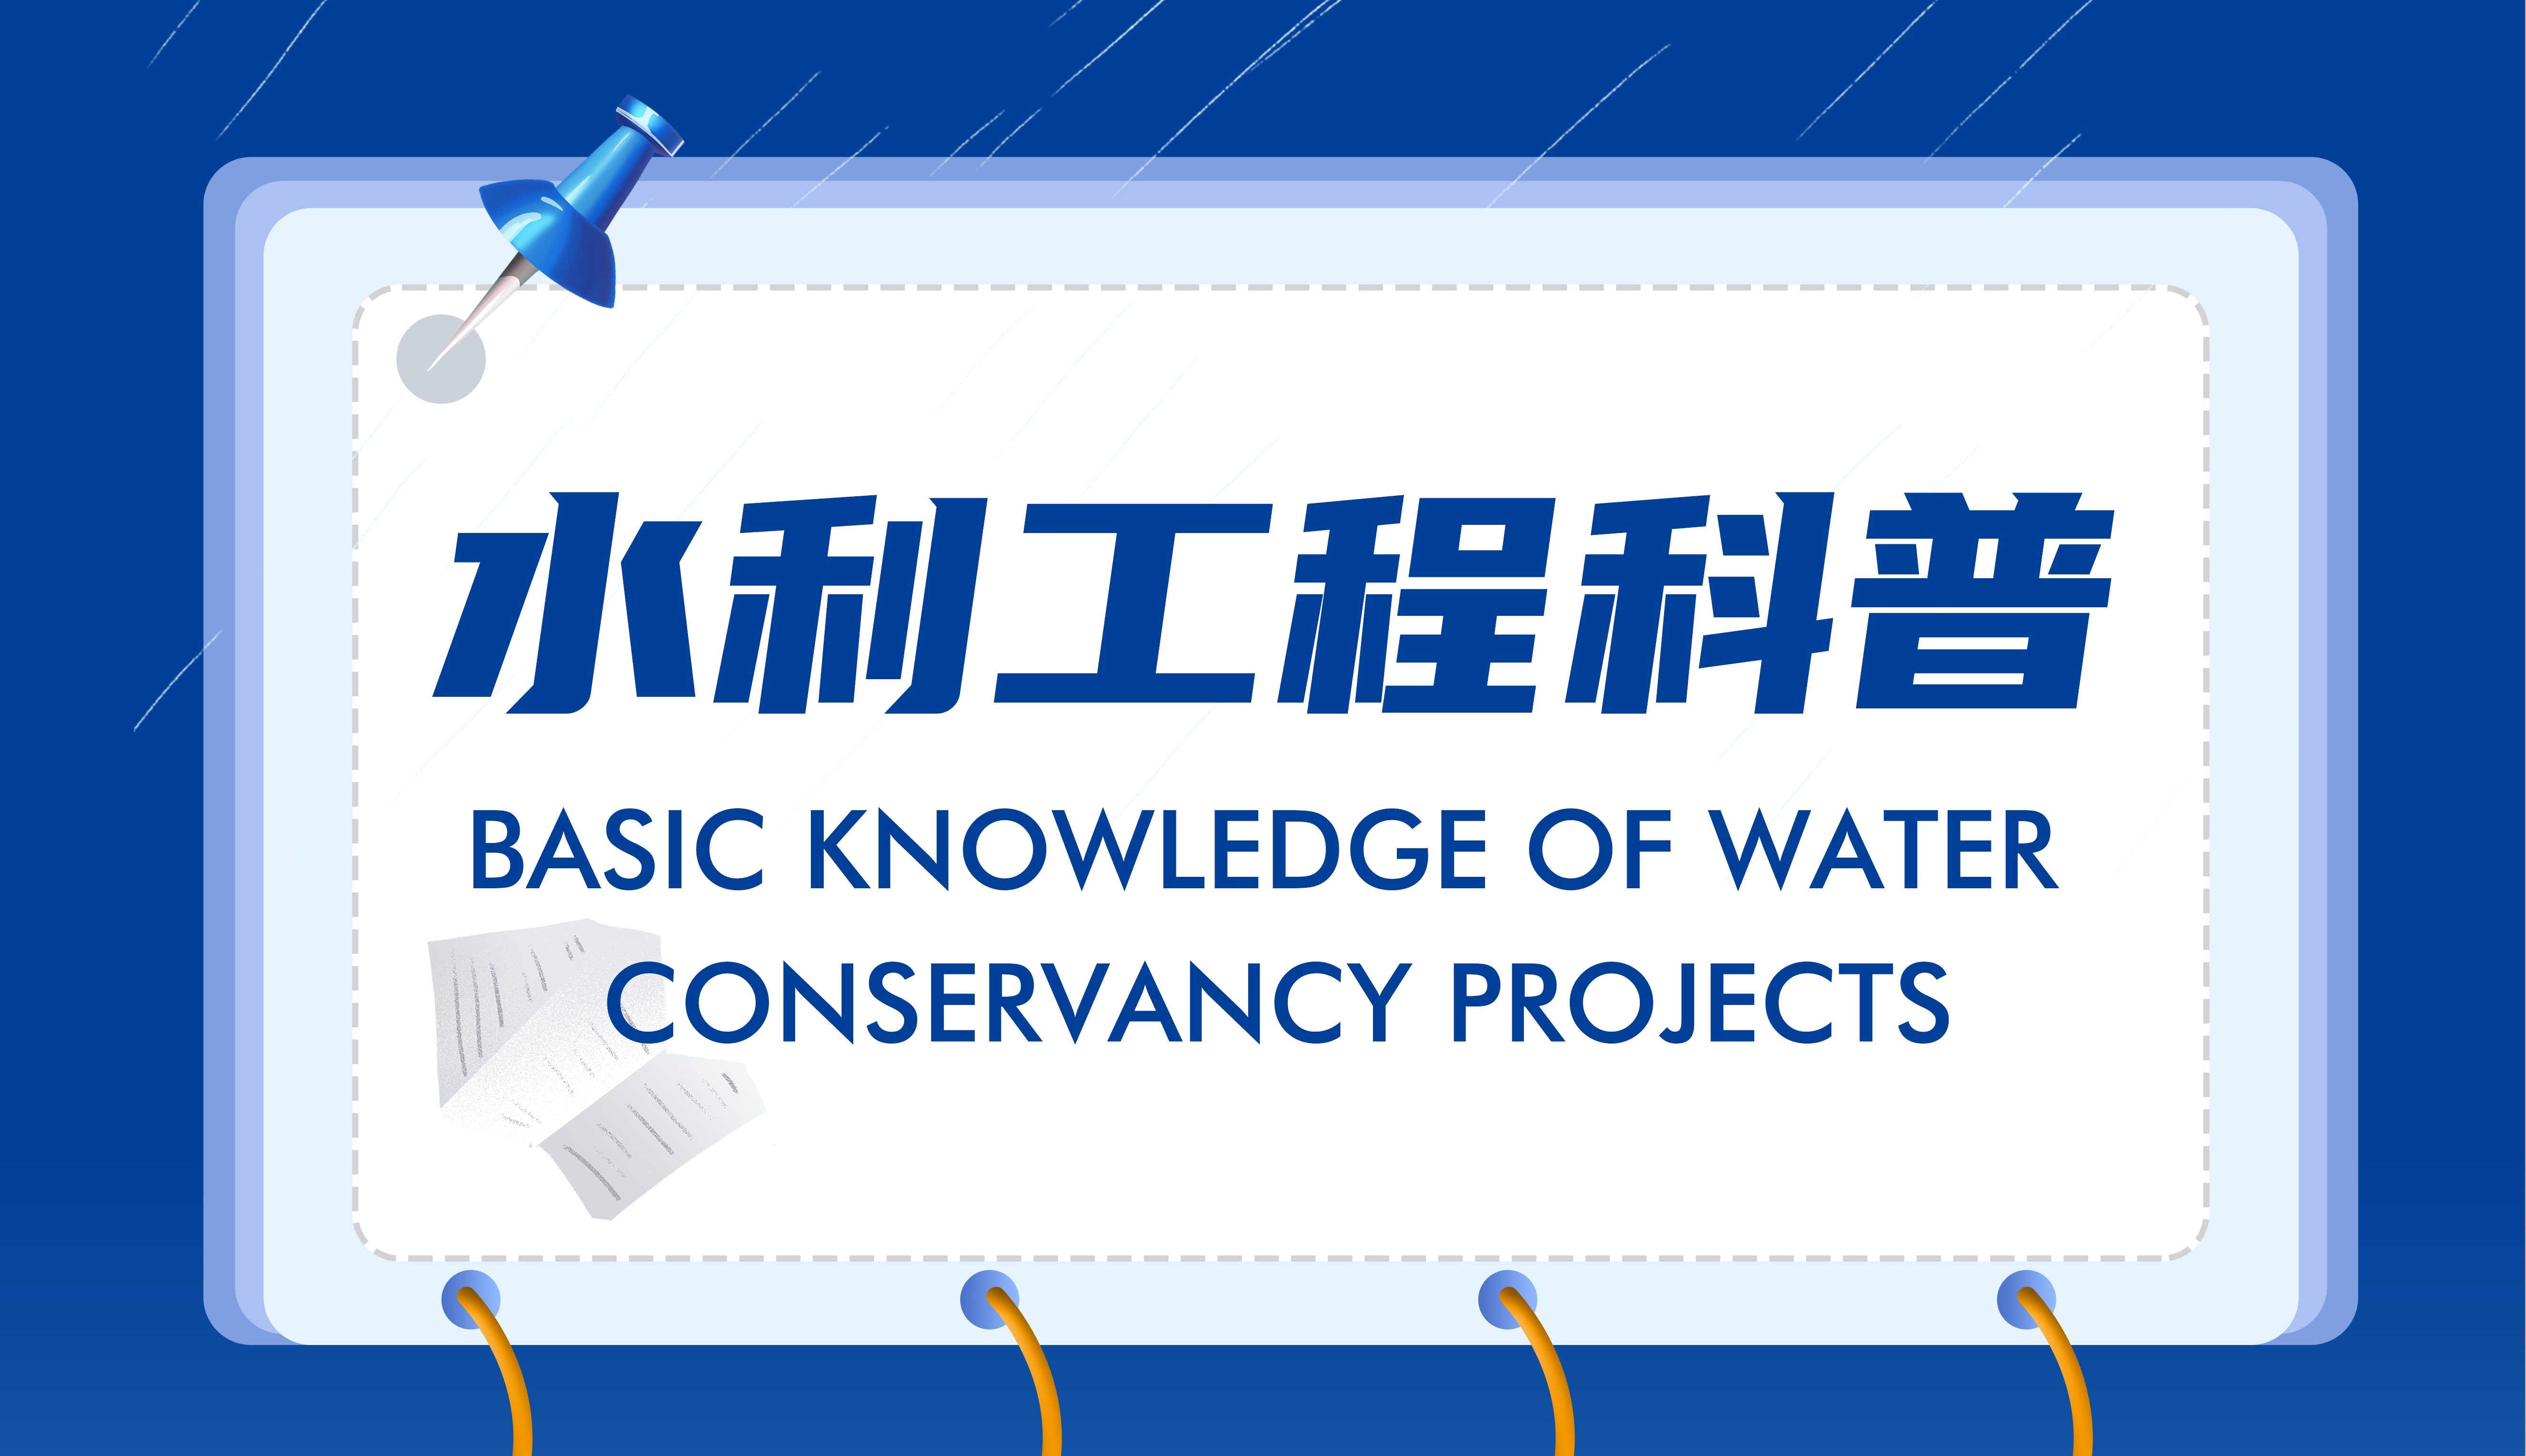 Basic Knowledge of Water Conservancy Projects